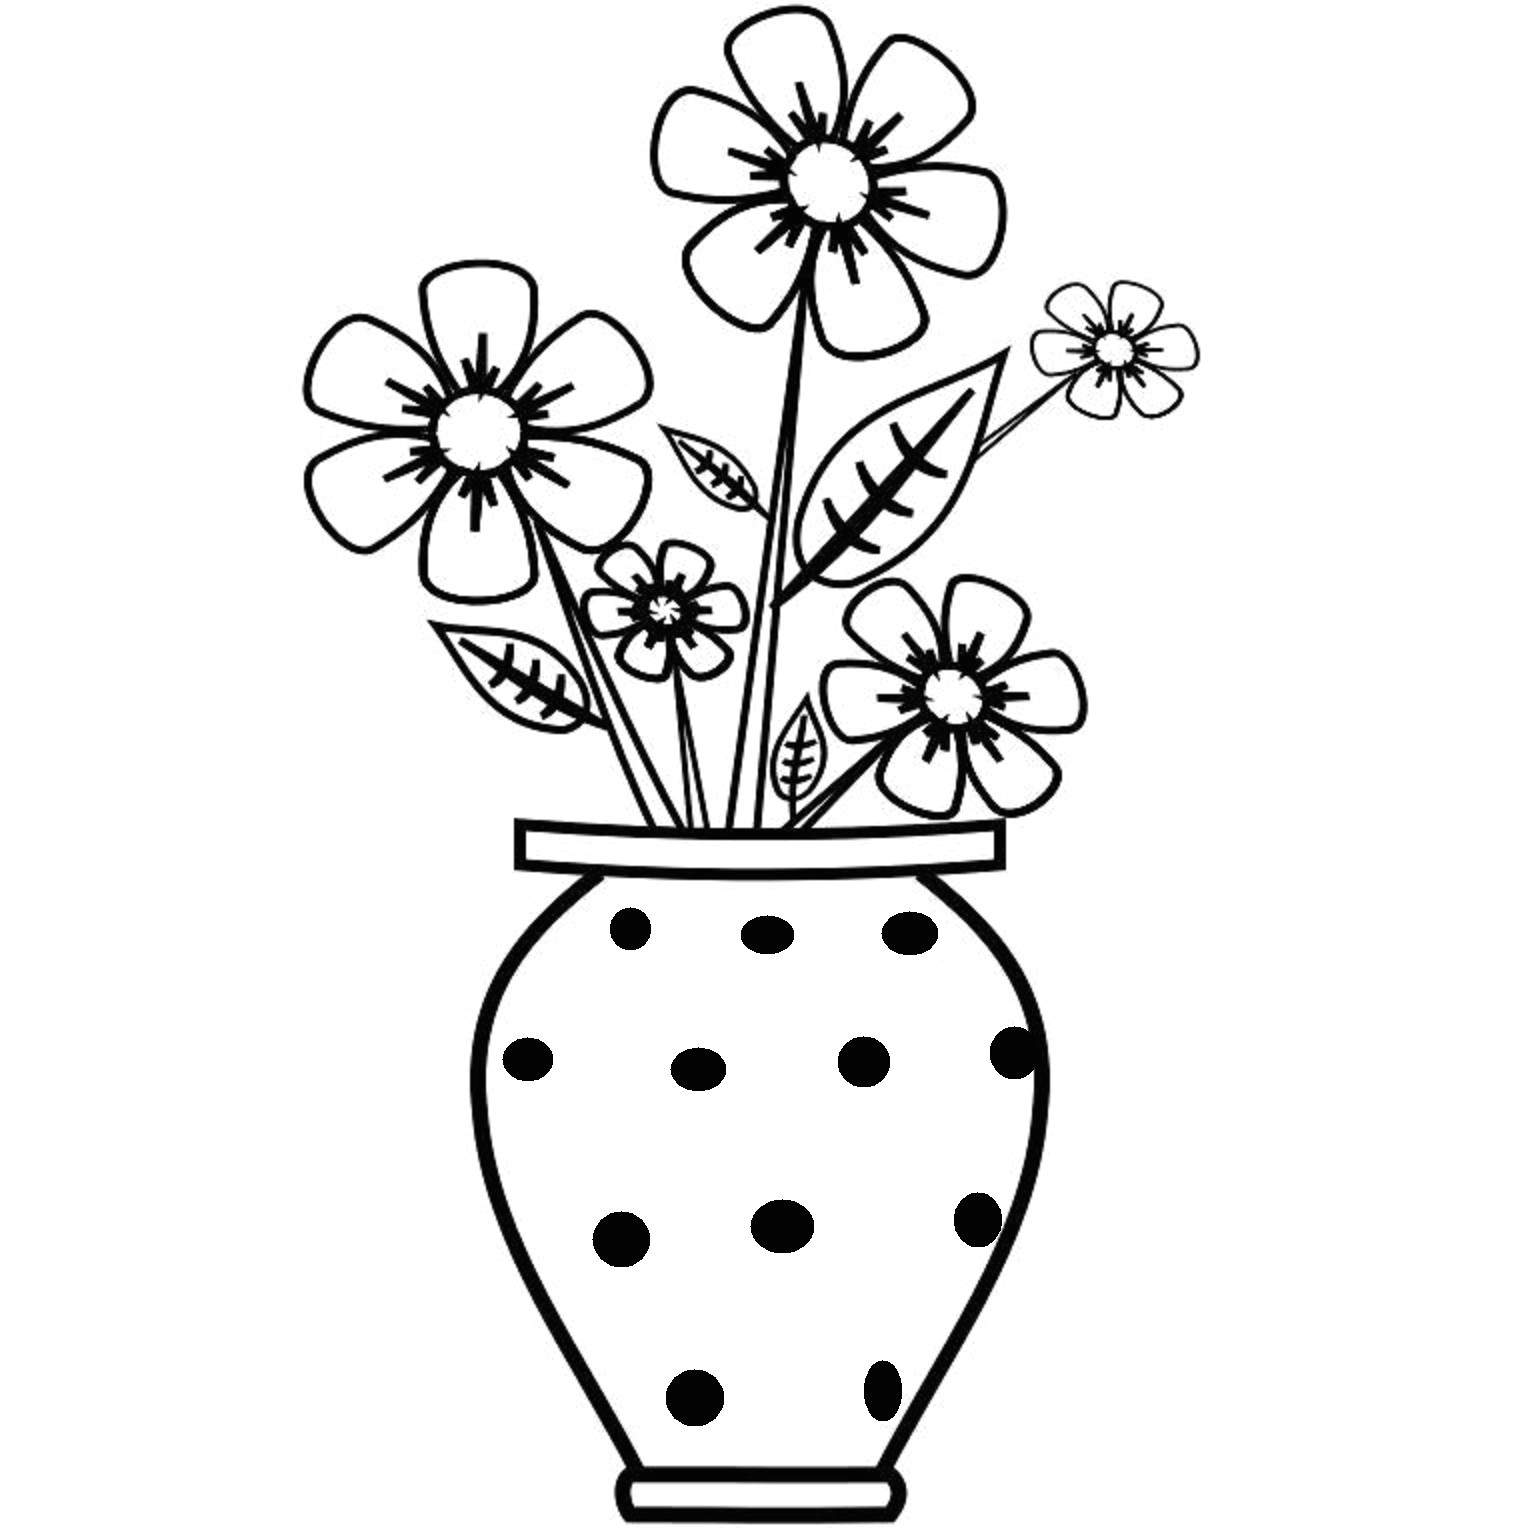 Drawing Of Flowers Pot Flowers to Draw Easy Step by Step Flower Pot for Drawing Sketches